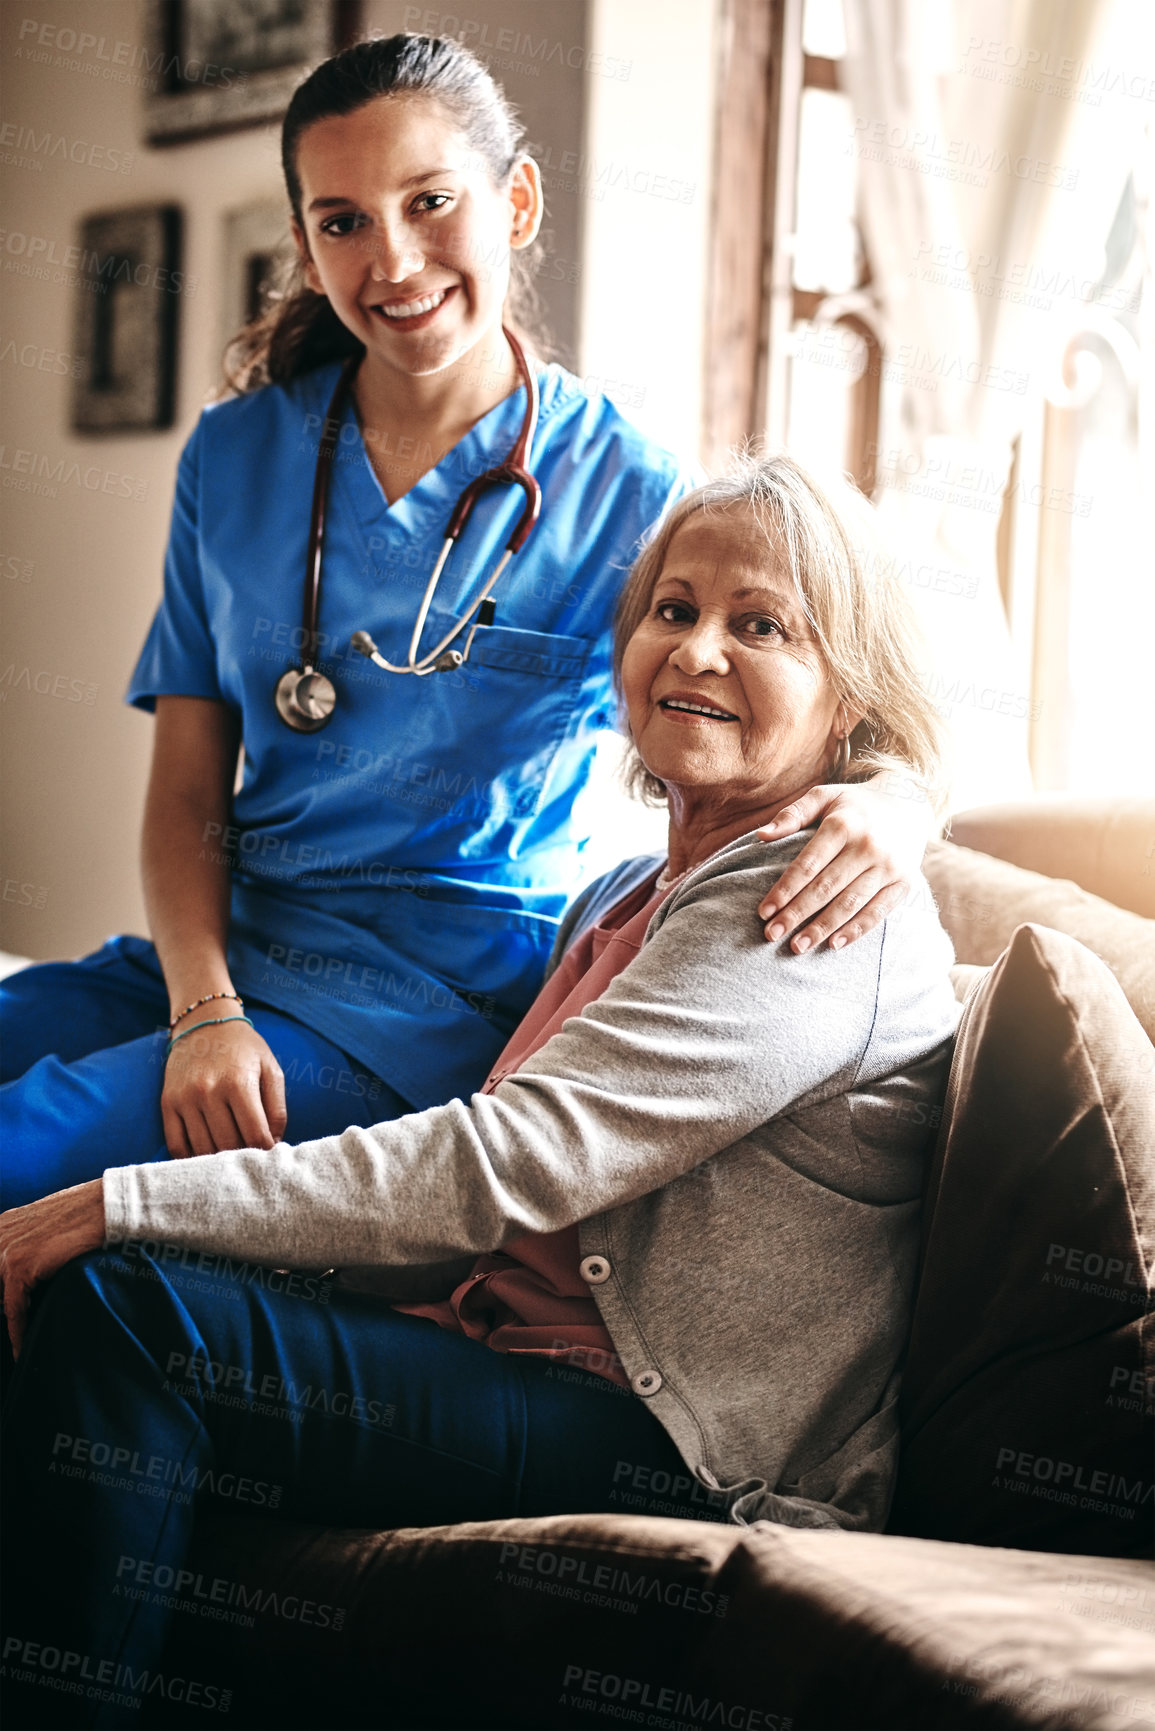 Buy stock photo Shot of a female nurse and a senior woman in a retirement home